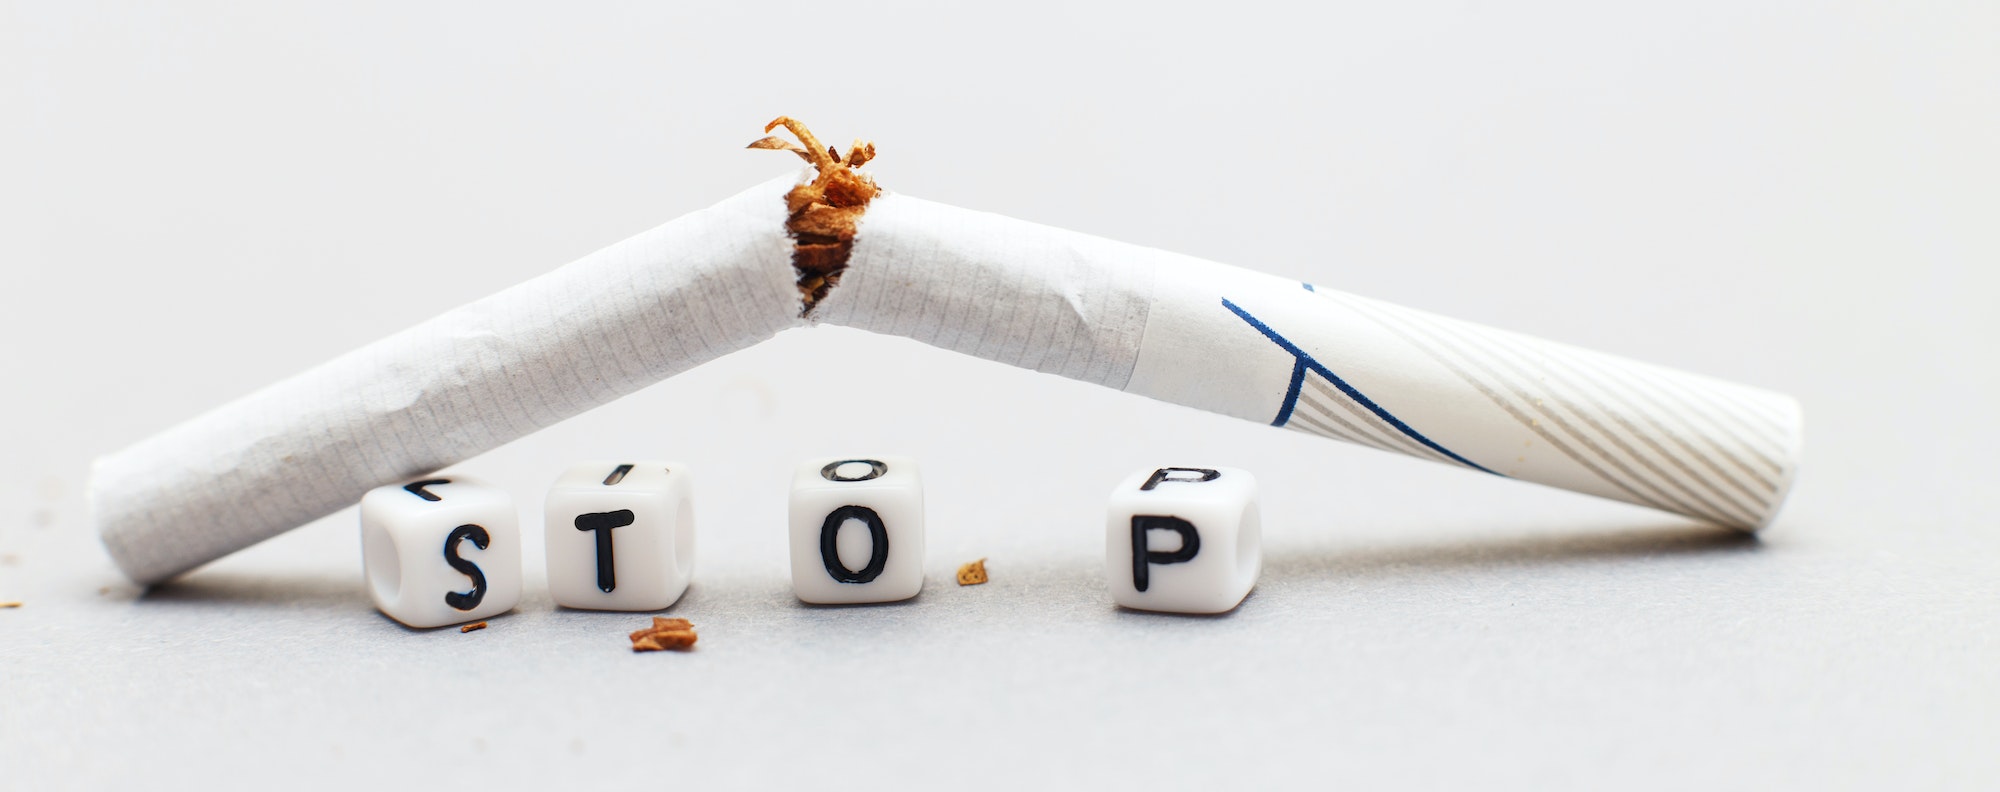 broken cigarette with the word stop on a gray background close. stop smoking concept.banner